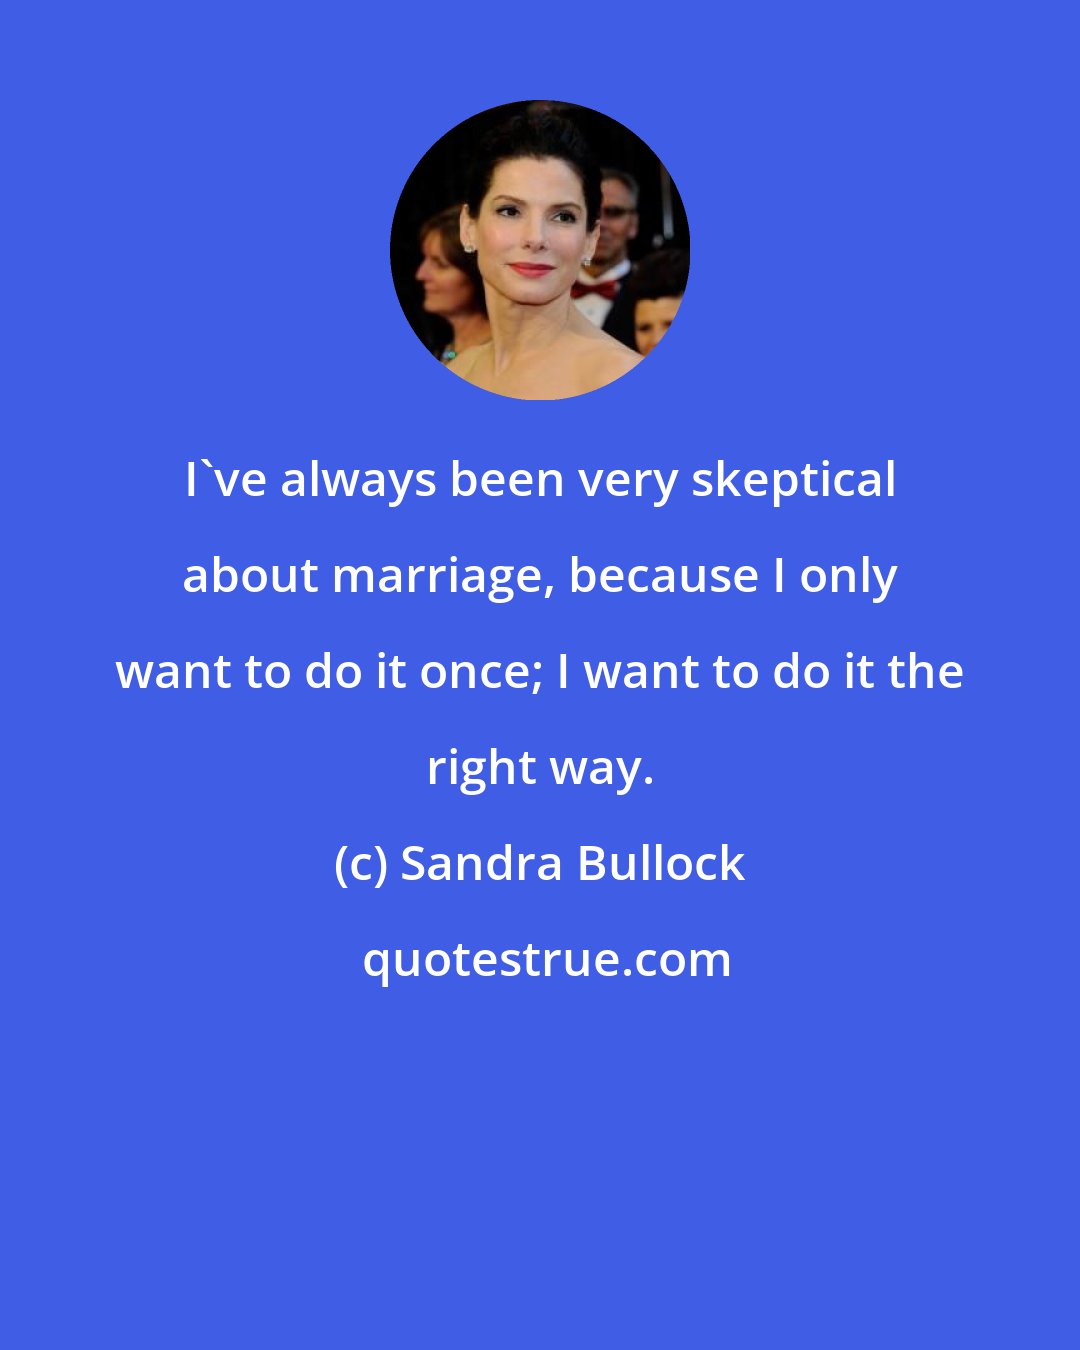 Sandra Bullock: I've always been very skeptical about marriage, because I only want to do it once; I want to do it the right way.